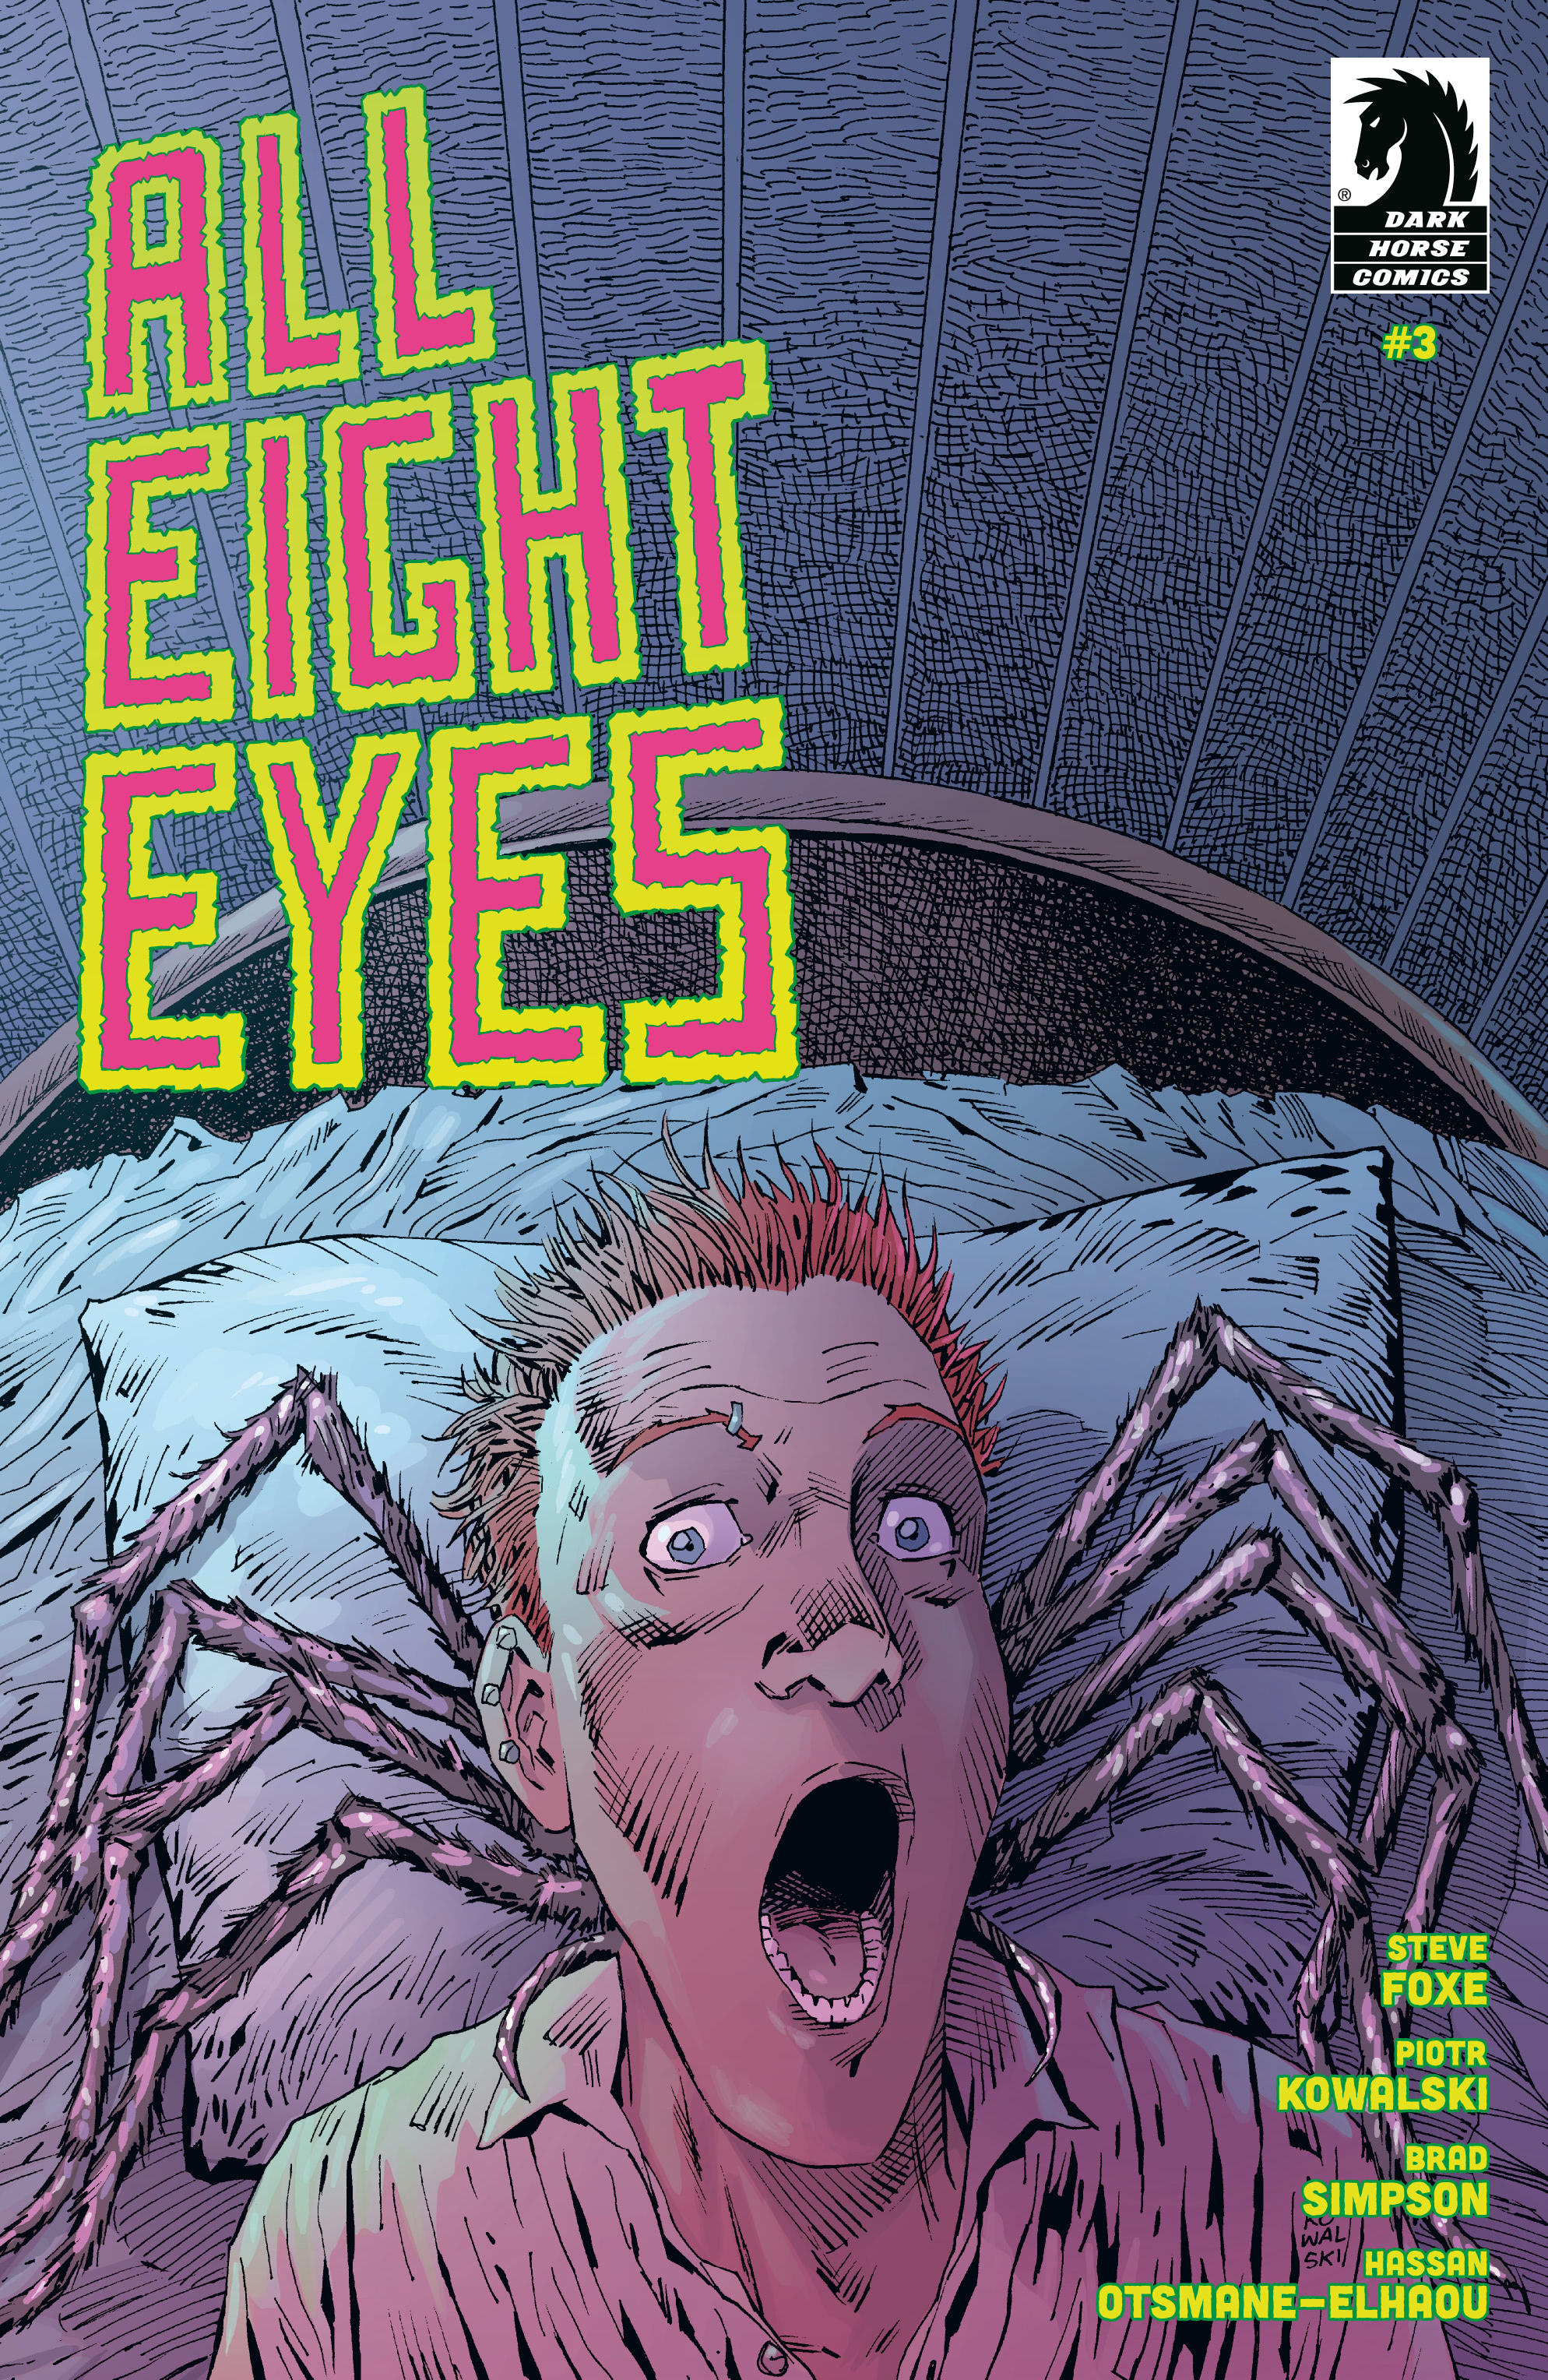 Read online All Eight Eyes comic -  Issue #3 - 1